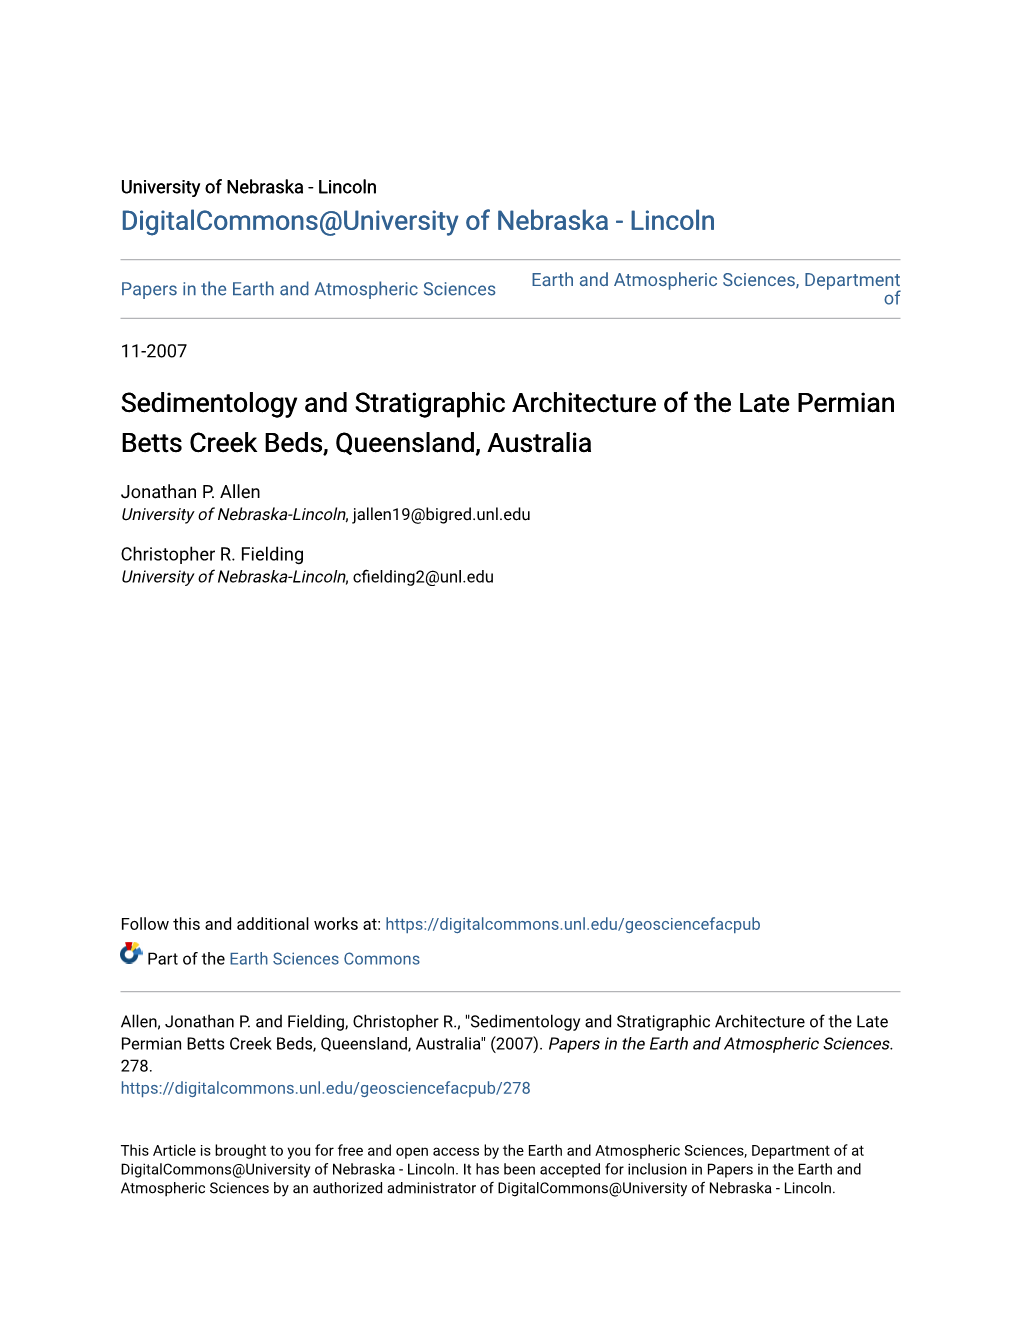 Sedimentology and Stratigraphic Architecture of the Late Permian Betts Creek Beds, Queensland, Australia